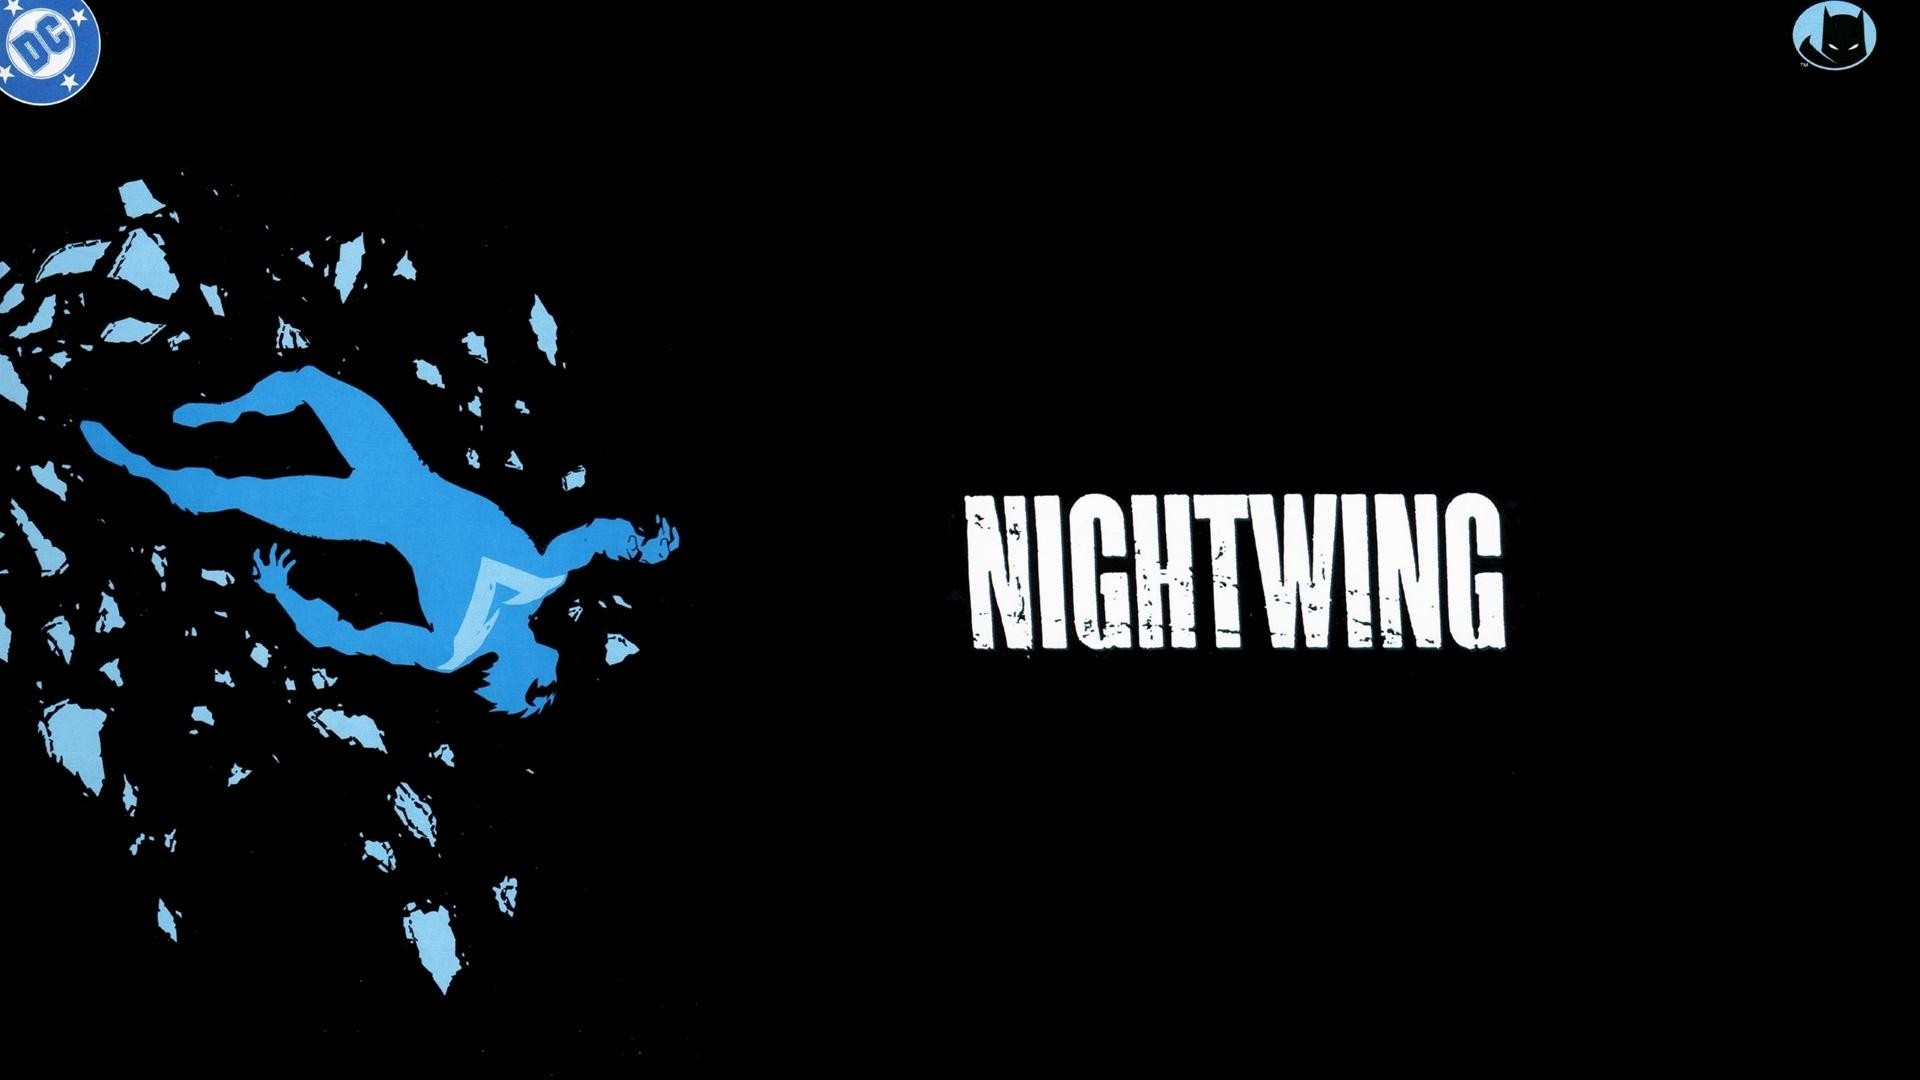 1920x1080 wallpaper.wiki-Download-Images-Nightwing-HD-PIC-WPE002295